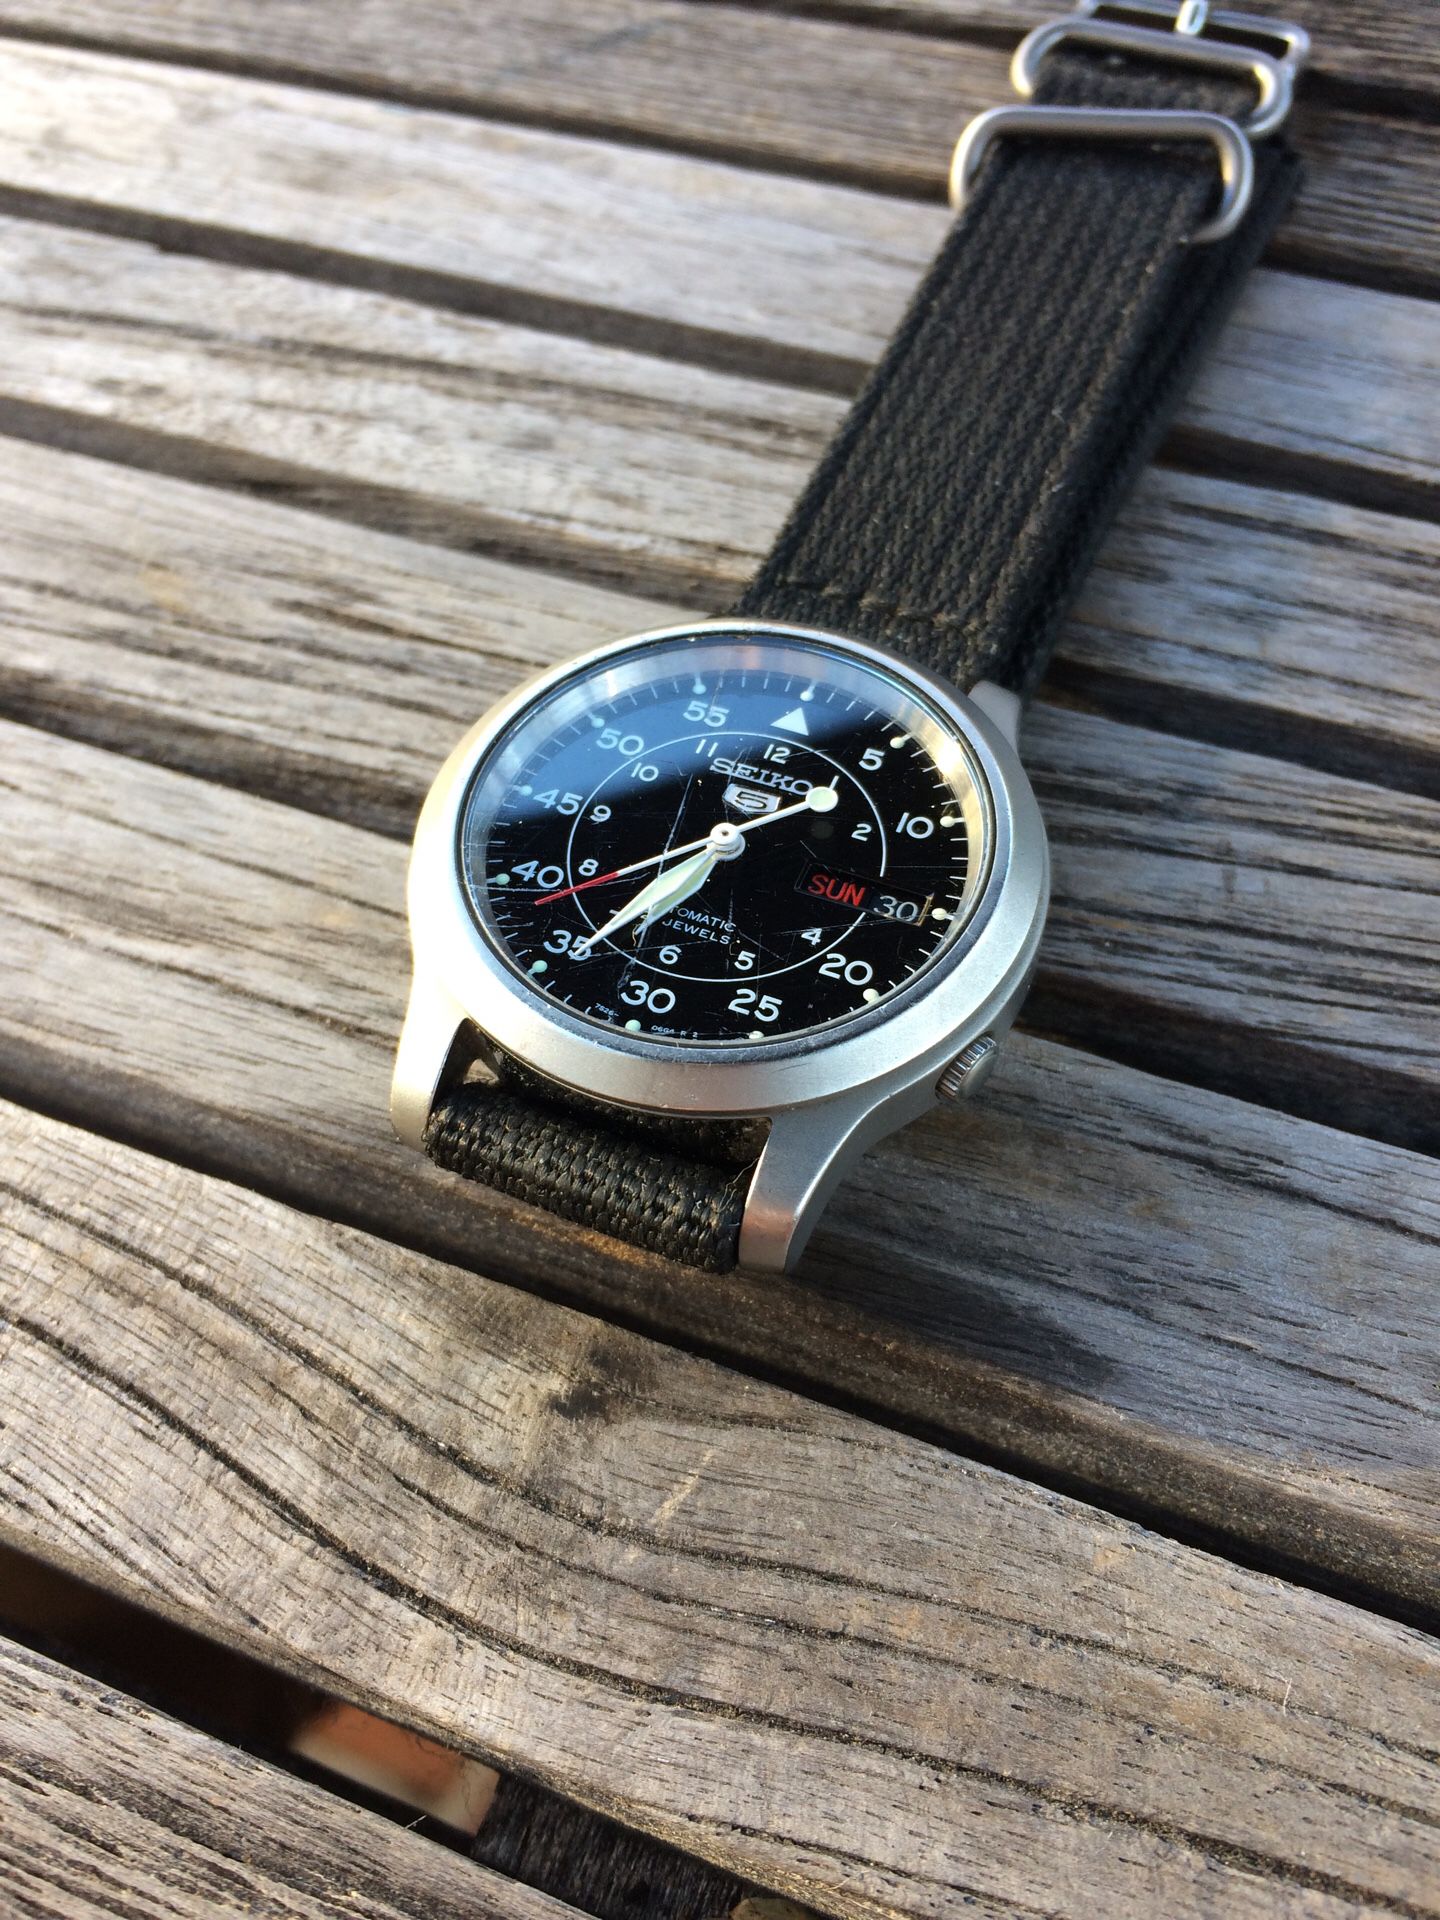 Seiko SNK809 — Scratched Hardlex but Good Condition